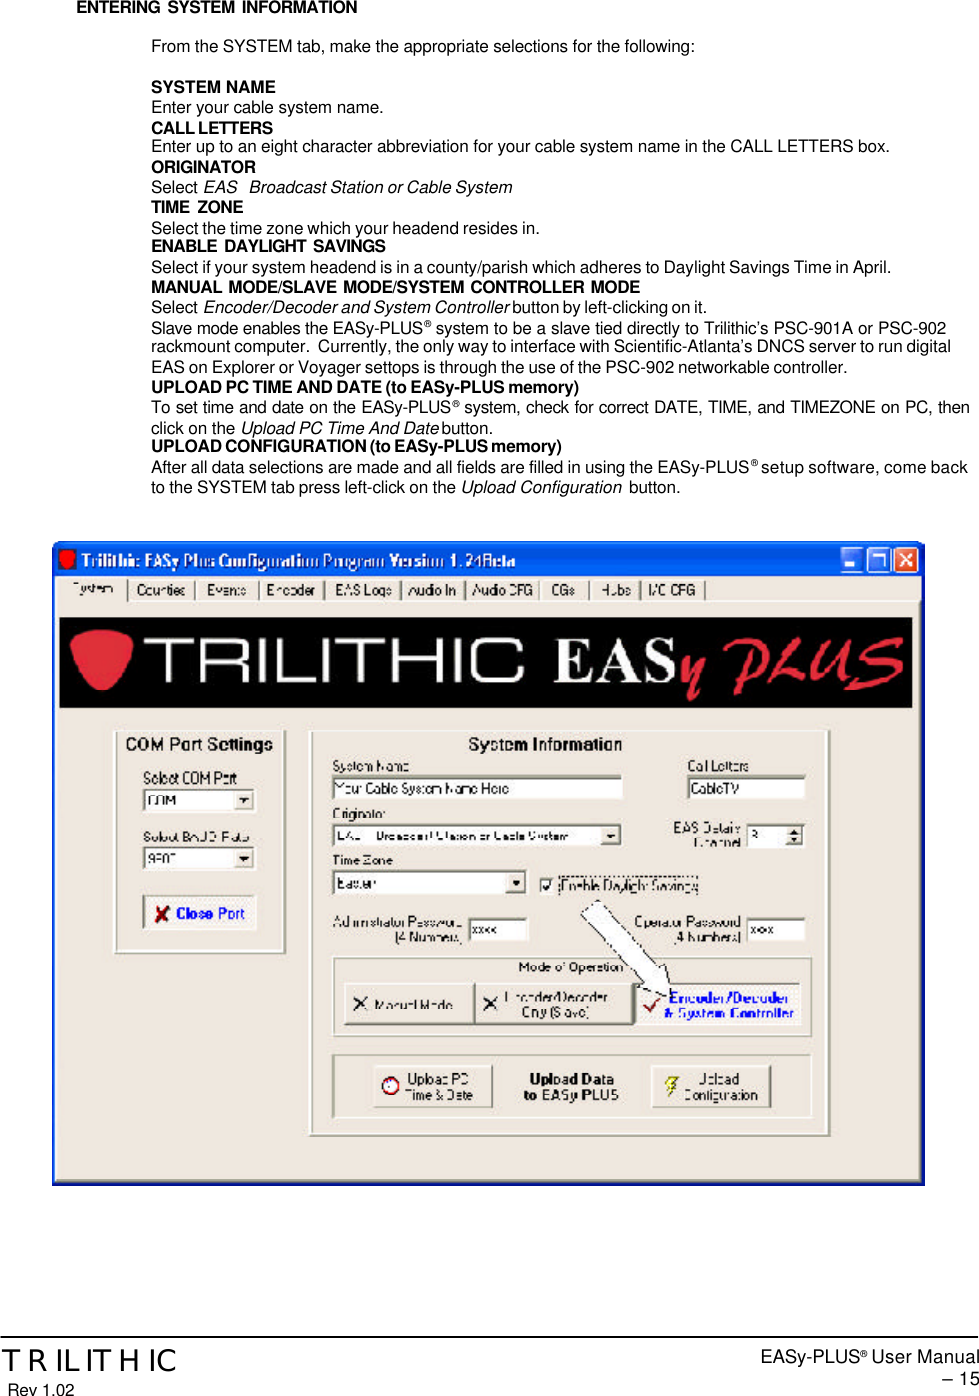 EASy-PLUS® User Manual – 15TRILITHIC Rev 1.02ENTERING SYSTEM INFORMATIONFrom the SYSTEM tab, make the appropriate selections for the following:SYSTEM NAMEEnter your cable system name.CALL LETTERSEnter up to an eight character abbreviation for your cable system name in the CALL LETTERS box.ORIGINATORSelect EAS   Broadcast Station or Cable SystemTIME ZONESelect the time zone which your headend resides in.ENABLE DAYLIGHT SAVINGSSelect if your system headend is in a county/parish which adheres to Daylight Savings Time in April.MANUAL MODE/SLAVE MODE/SYSTEM CONTROLLER MODESelect Encoder/Decoder and System Controller button by left-clicking on it.Slave mode enables the EASy-PLUS® system to be a slave tied directly to Trilithic’s PSC-901A or PSC-902rackmount computer.  Currently, the only way to interface with Scientific-Atlanta’s DNCS server to run digitalEAS on Explorer or Voyager settops is through the use of the PSC-902 networkable controller.UPLOAD PC TIME AND DATE (to EASy-PLUS memory)To set time and date on the EASy-PLUS® system, check for correct DATE, TIME, and TIMEZONE on PC, thenclick on the Upload PC Time And Date button.UPLOAD CONFIGURATION (to EASy-PLUS memory)After all data selections are made and all fields are filled in using the EASy-PLUS® setup software, come backto the SYSTEM tab press left-click on the Upload Configuration  button.